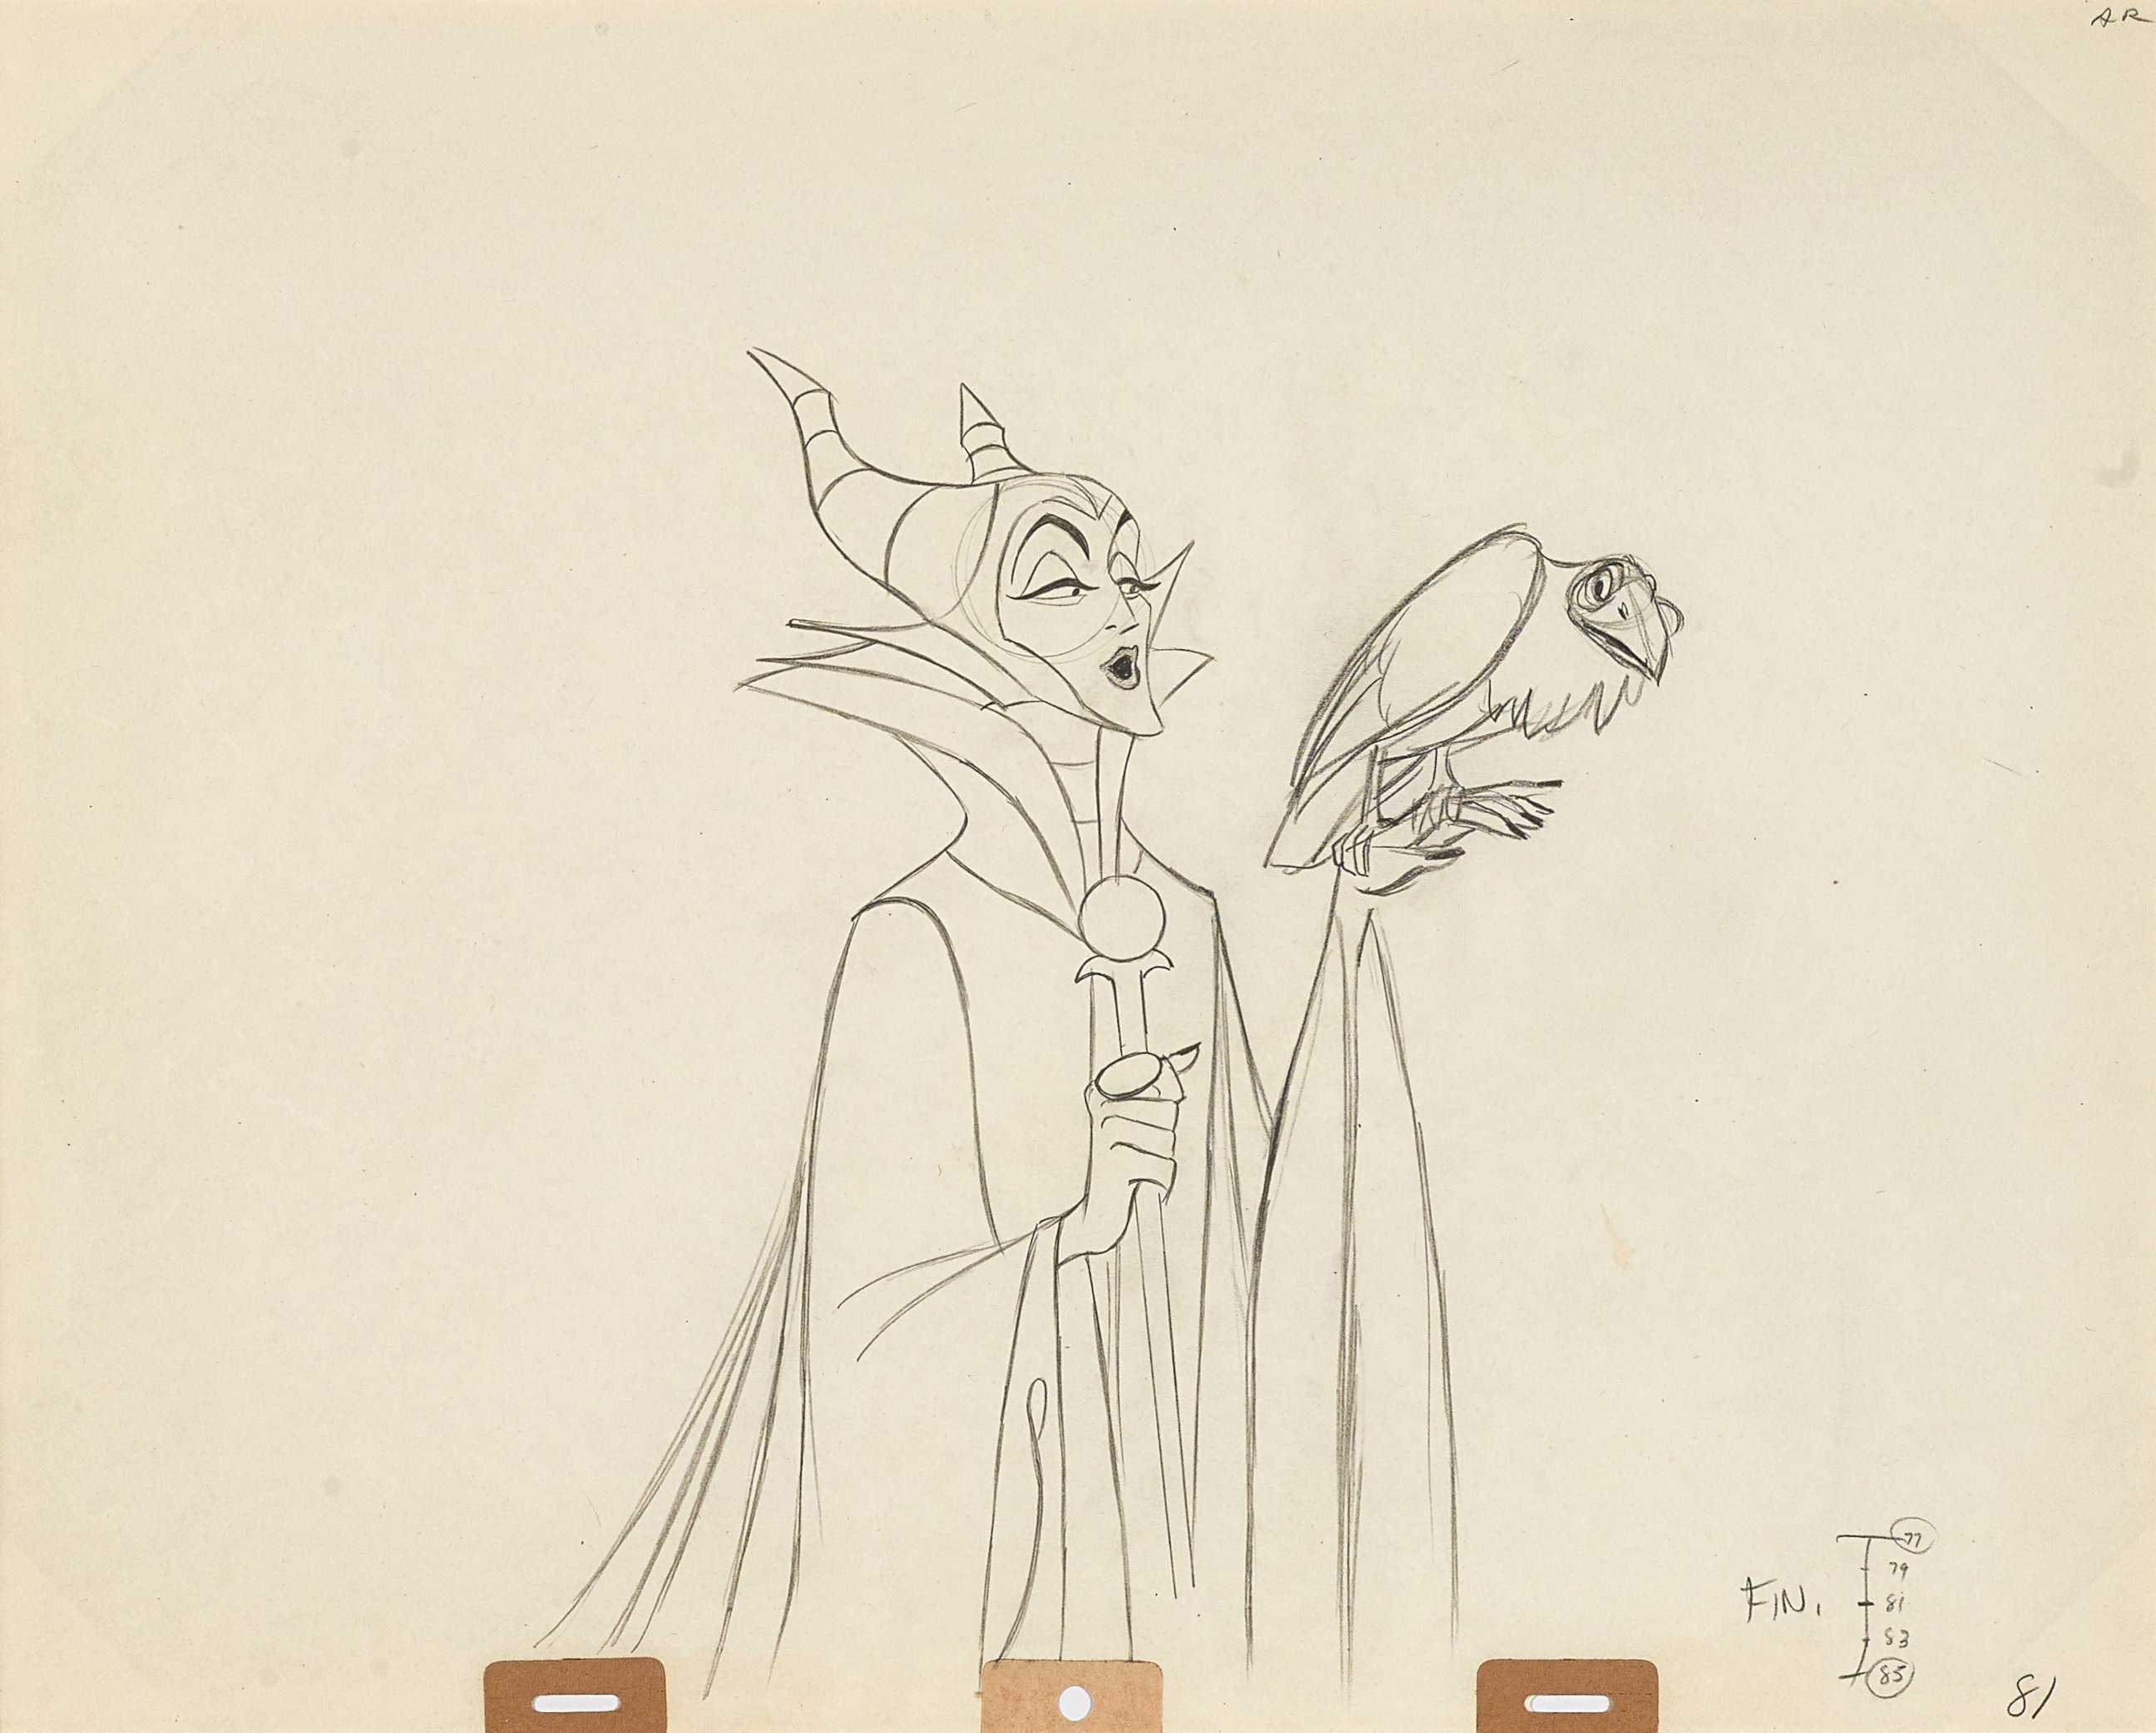 PHOTO: An animation drawing of Maleficent from "Sleeping Beauty," Walt Disney Studios, 1959. Made with graphite on paper, matted and framed. Estimate: $500-700.